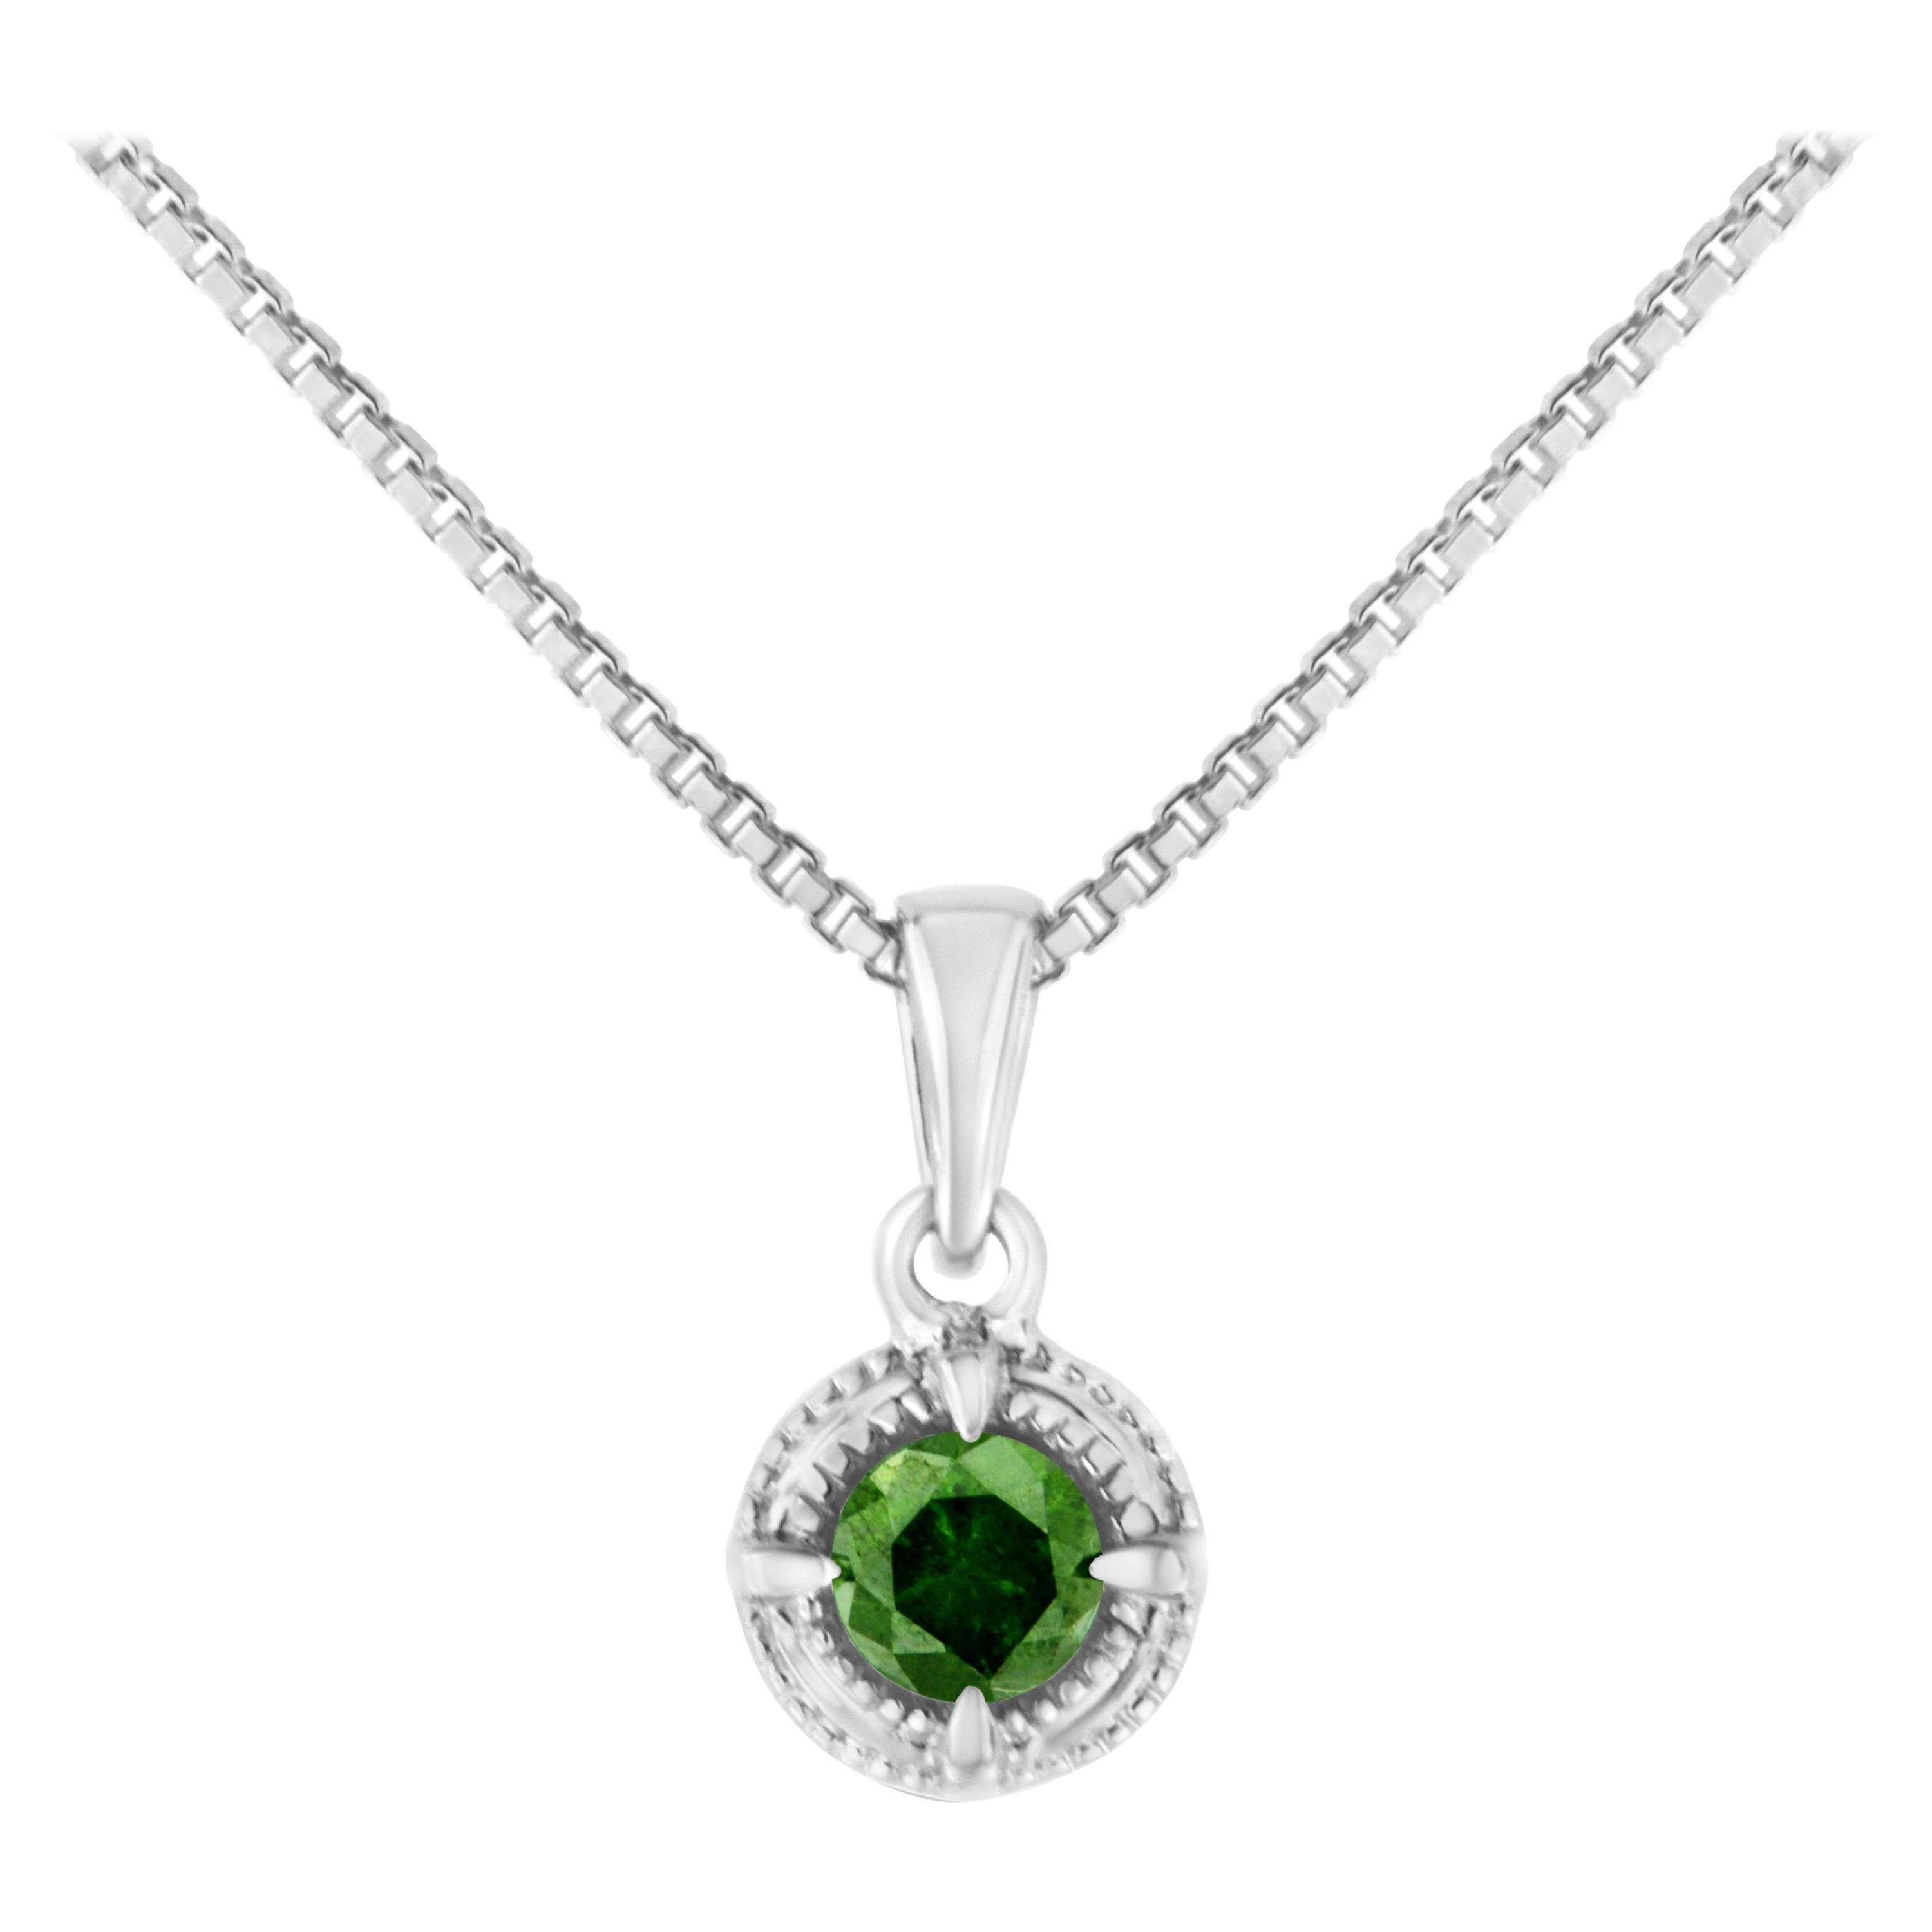 1 Ct Green Sapphire Round Bezel Pendant .925 Sterling Silver 